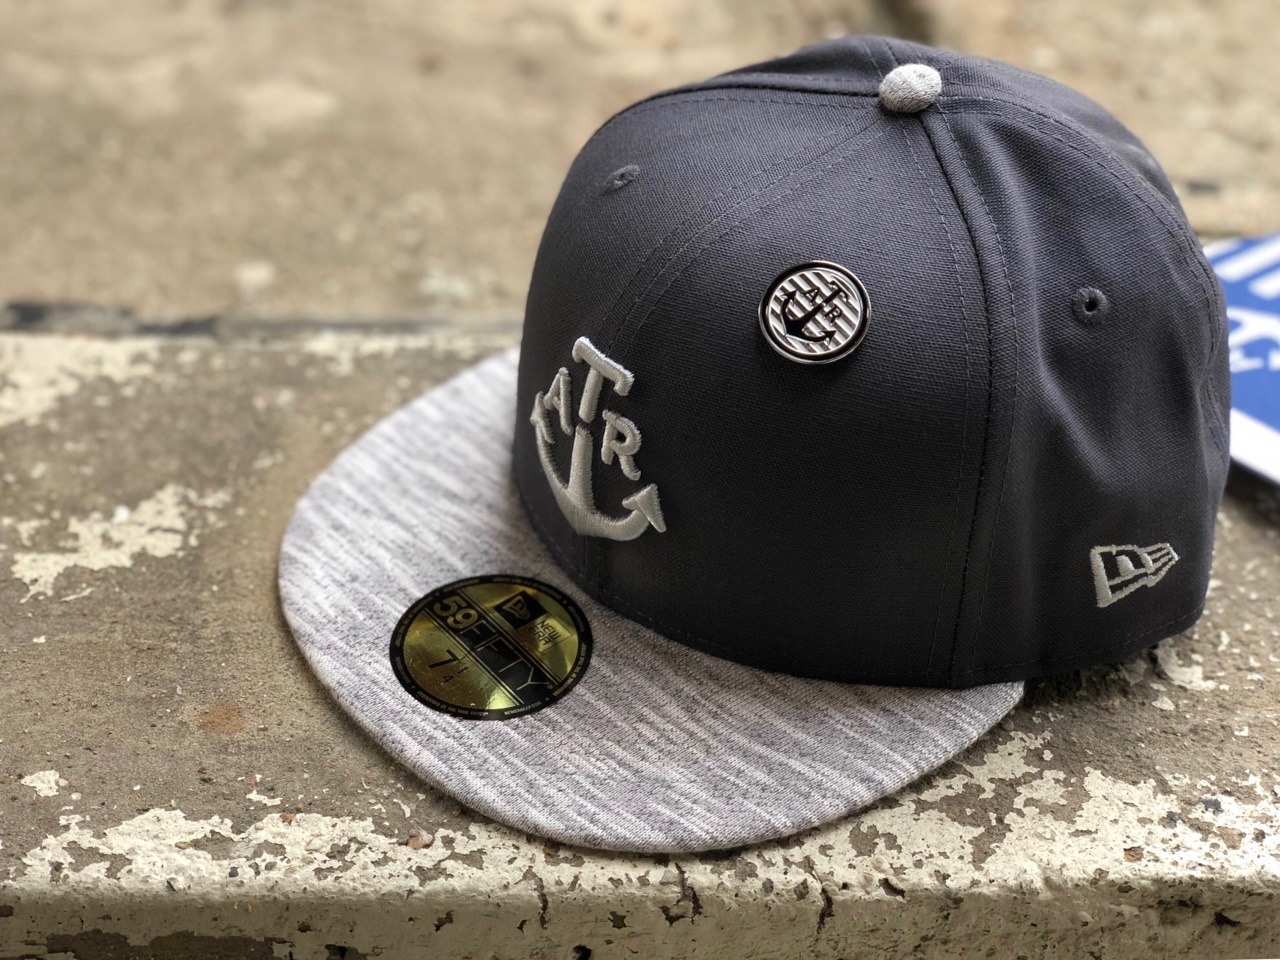 regularisbetter.com 12 noon CST 4-27-2018
#regularisbetter #allthingsregular #fittedcap #lids #fittedfiend #thatfittedmean #stayfitted #igfittedcommunity #pnwfitted #myfitteds #fittednation #neweracap #neweracaptalk #teamfitted #flyyourownflag...